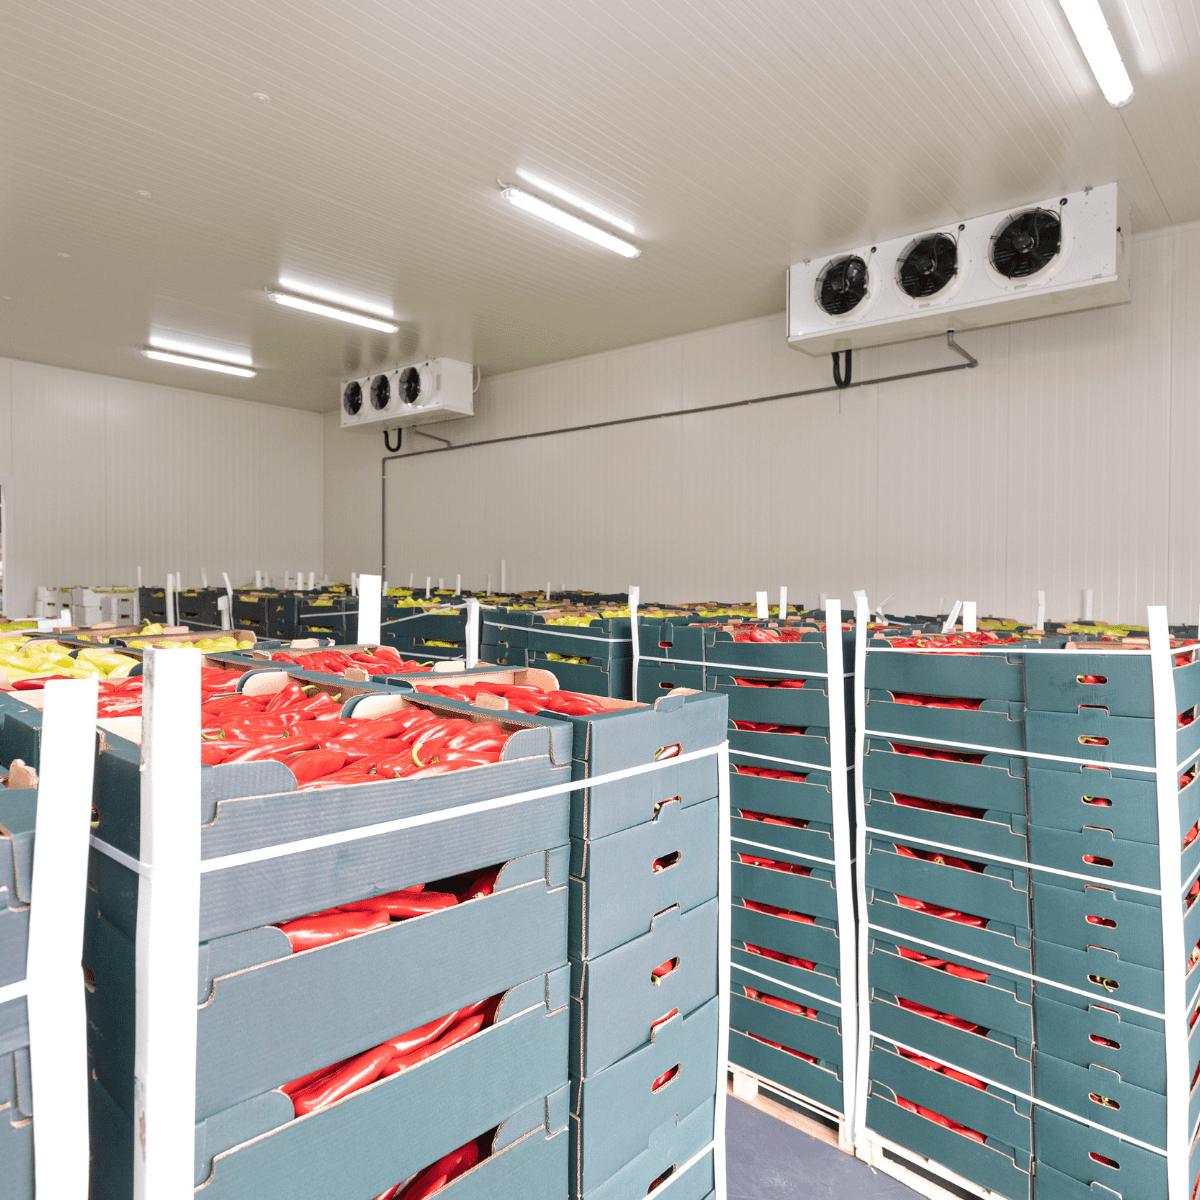 How to Keep Harvested Vegetables in Cold Storage